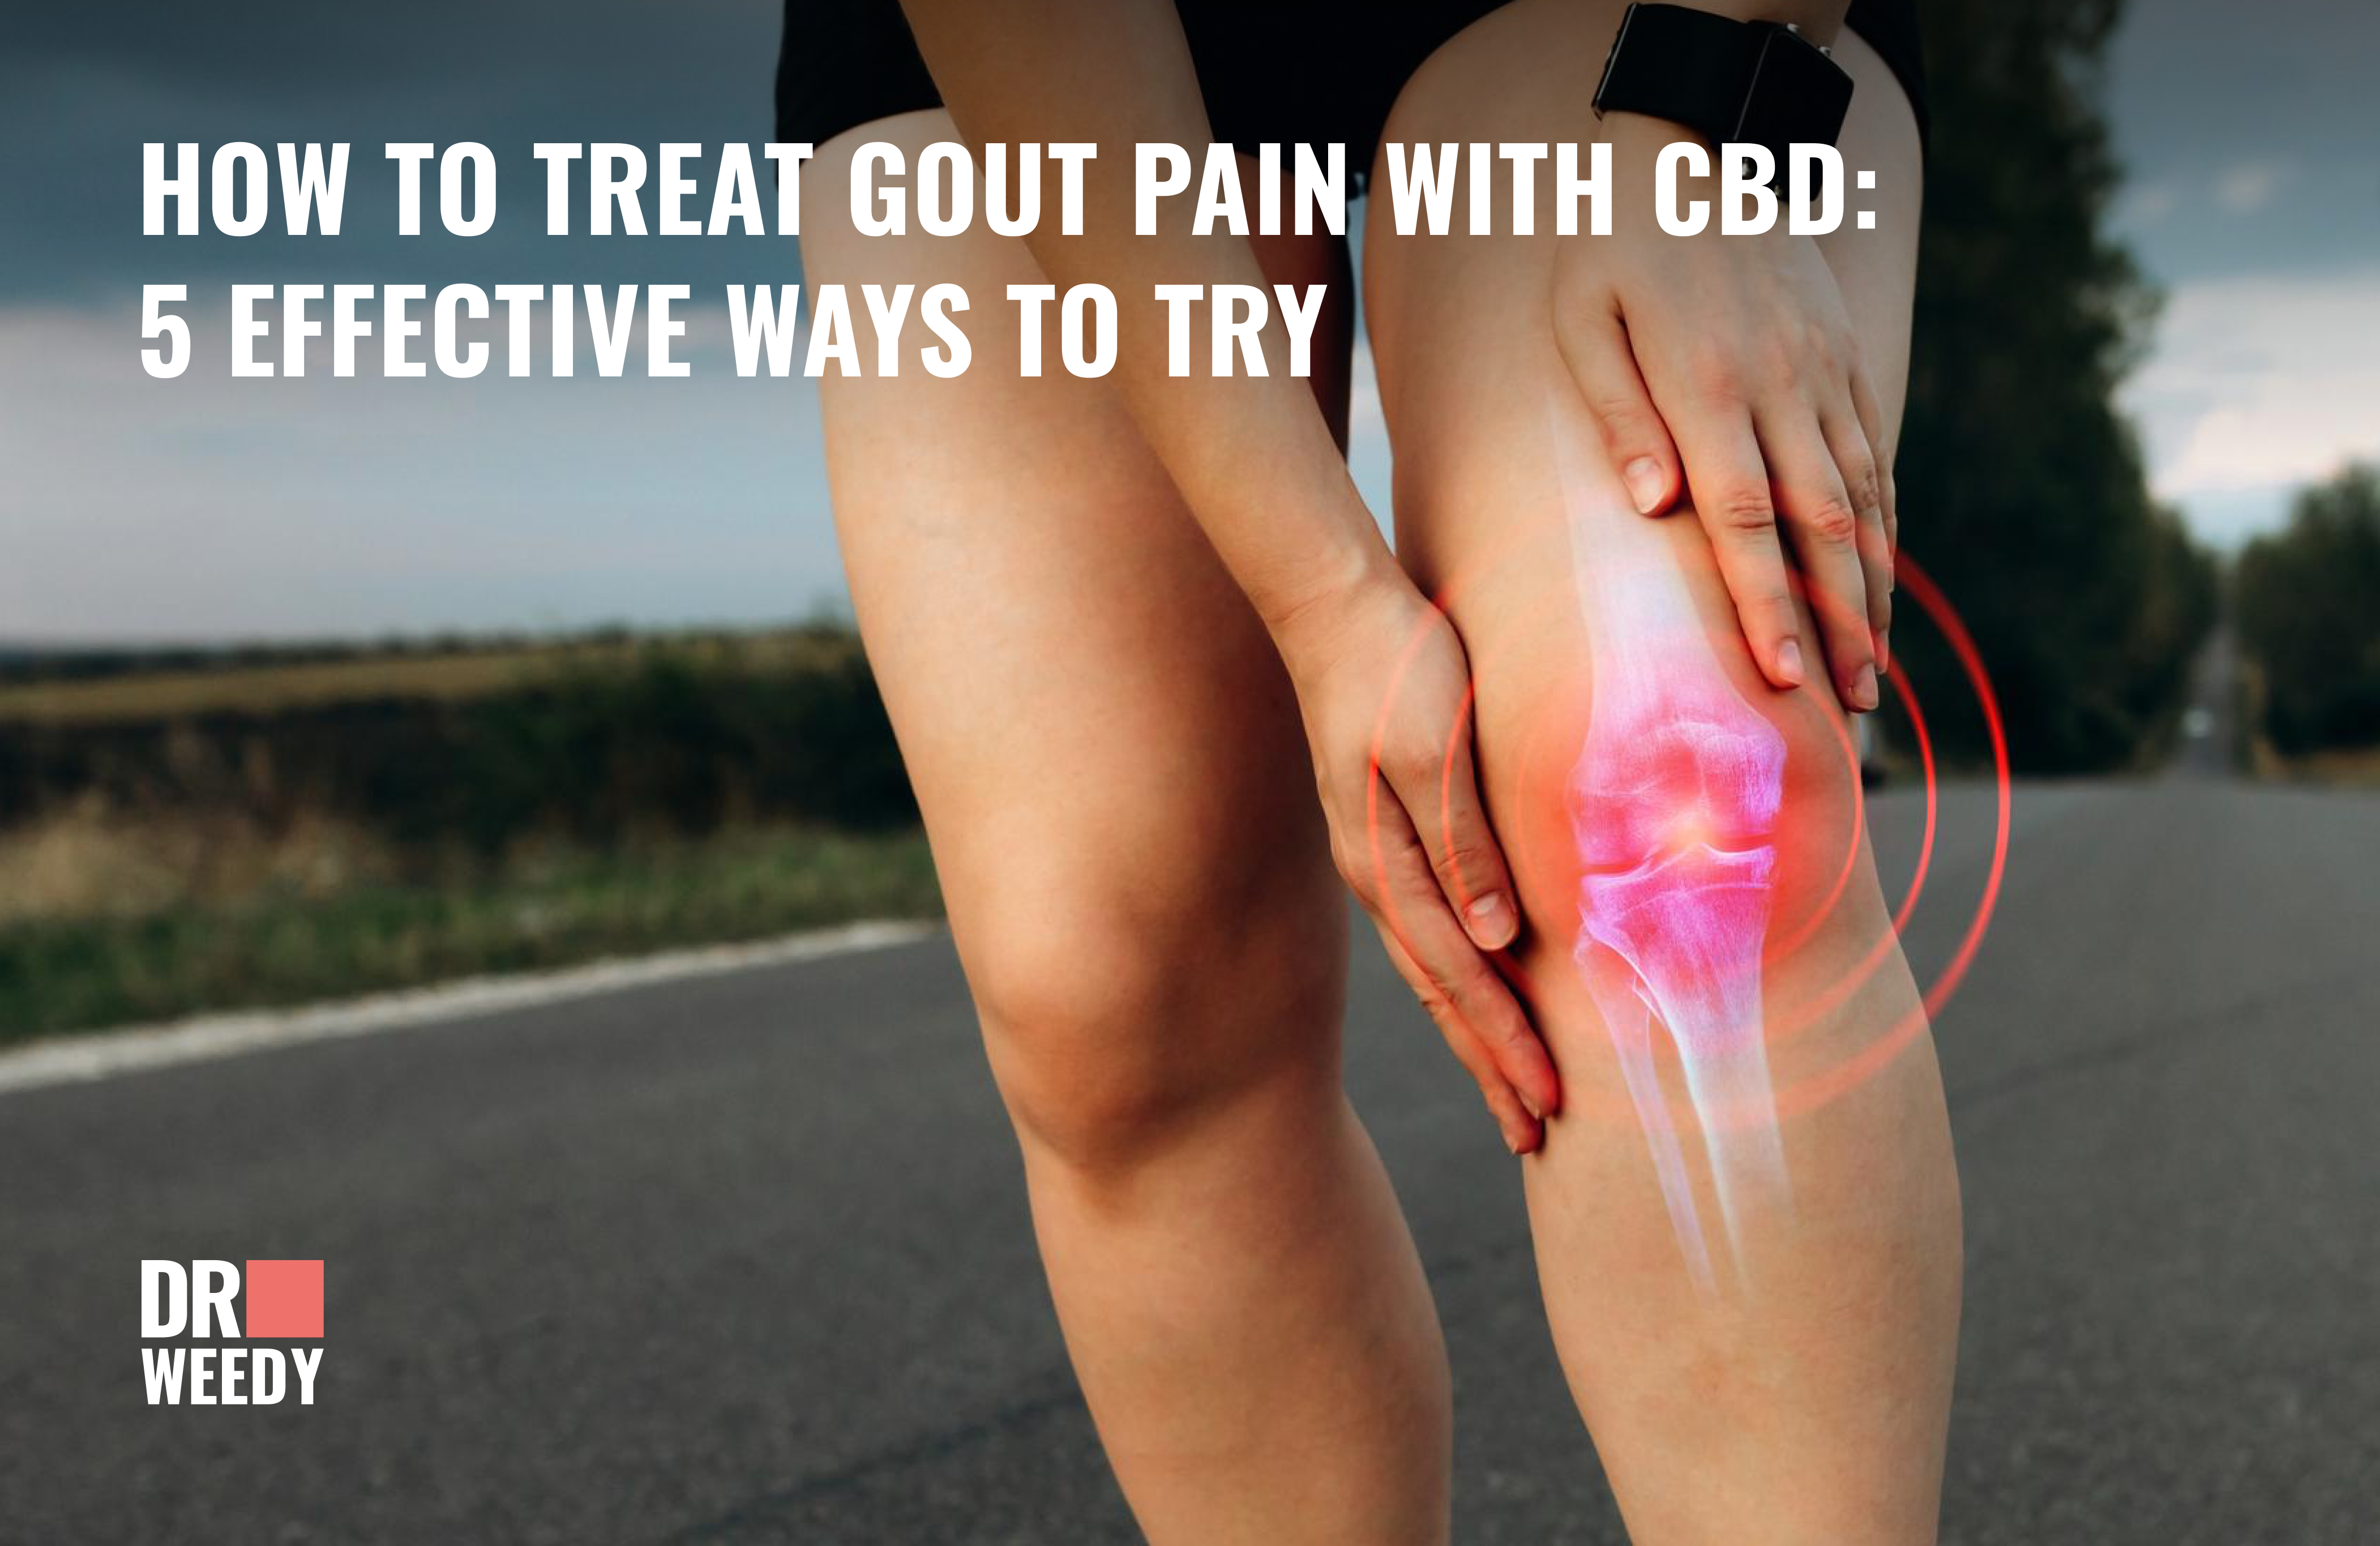 How to Treat Gout Pain with CBD: 5 Effective Ways to Try